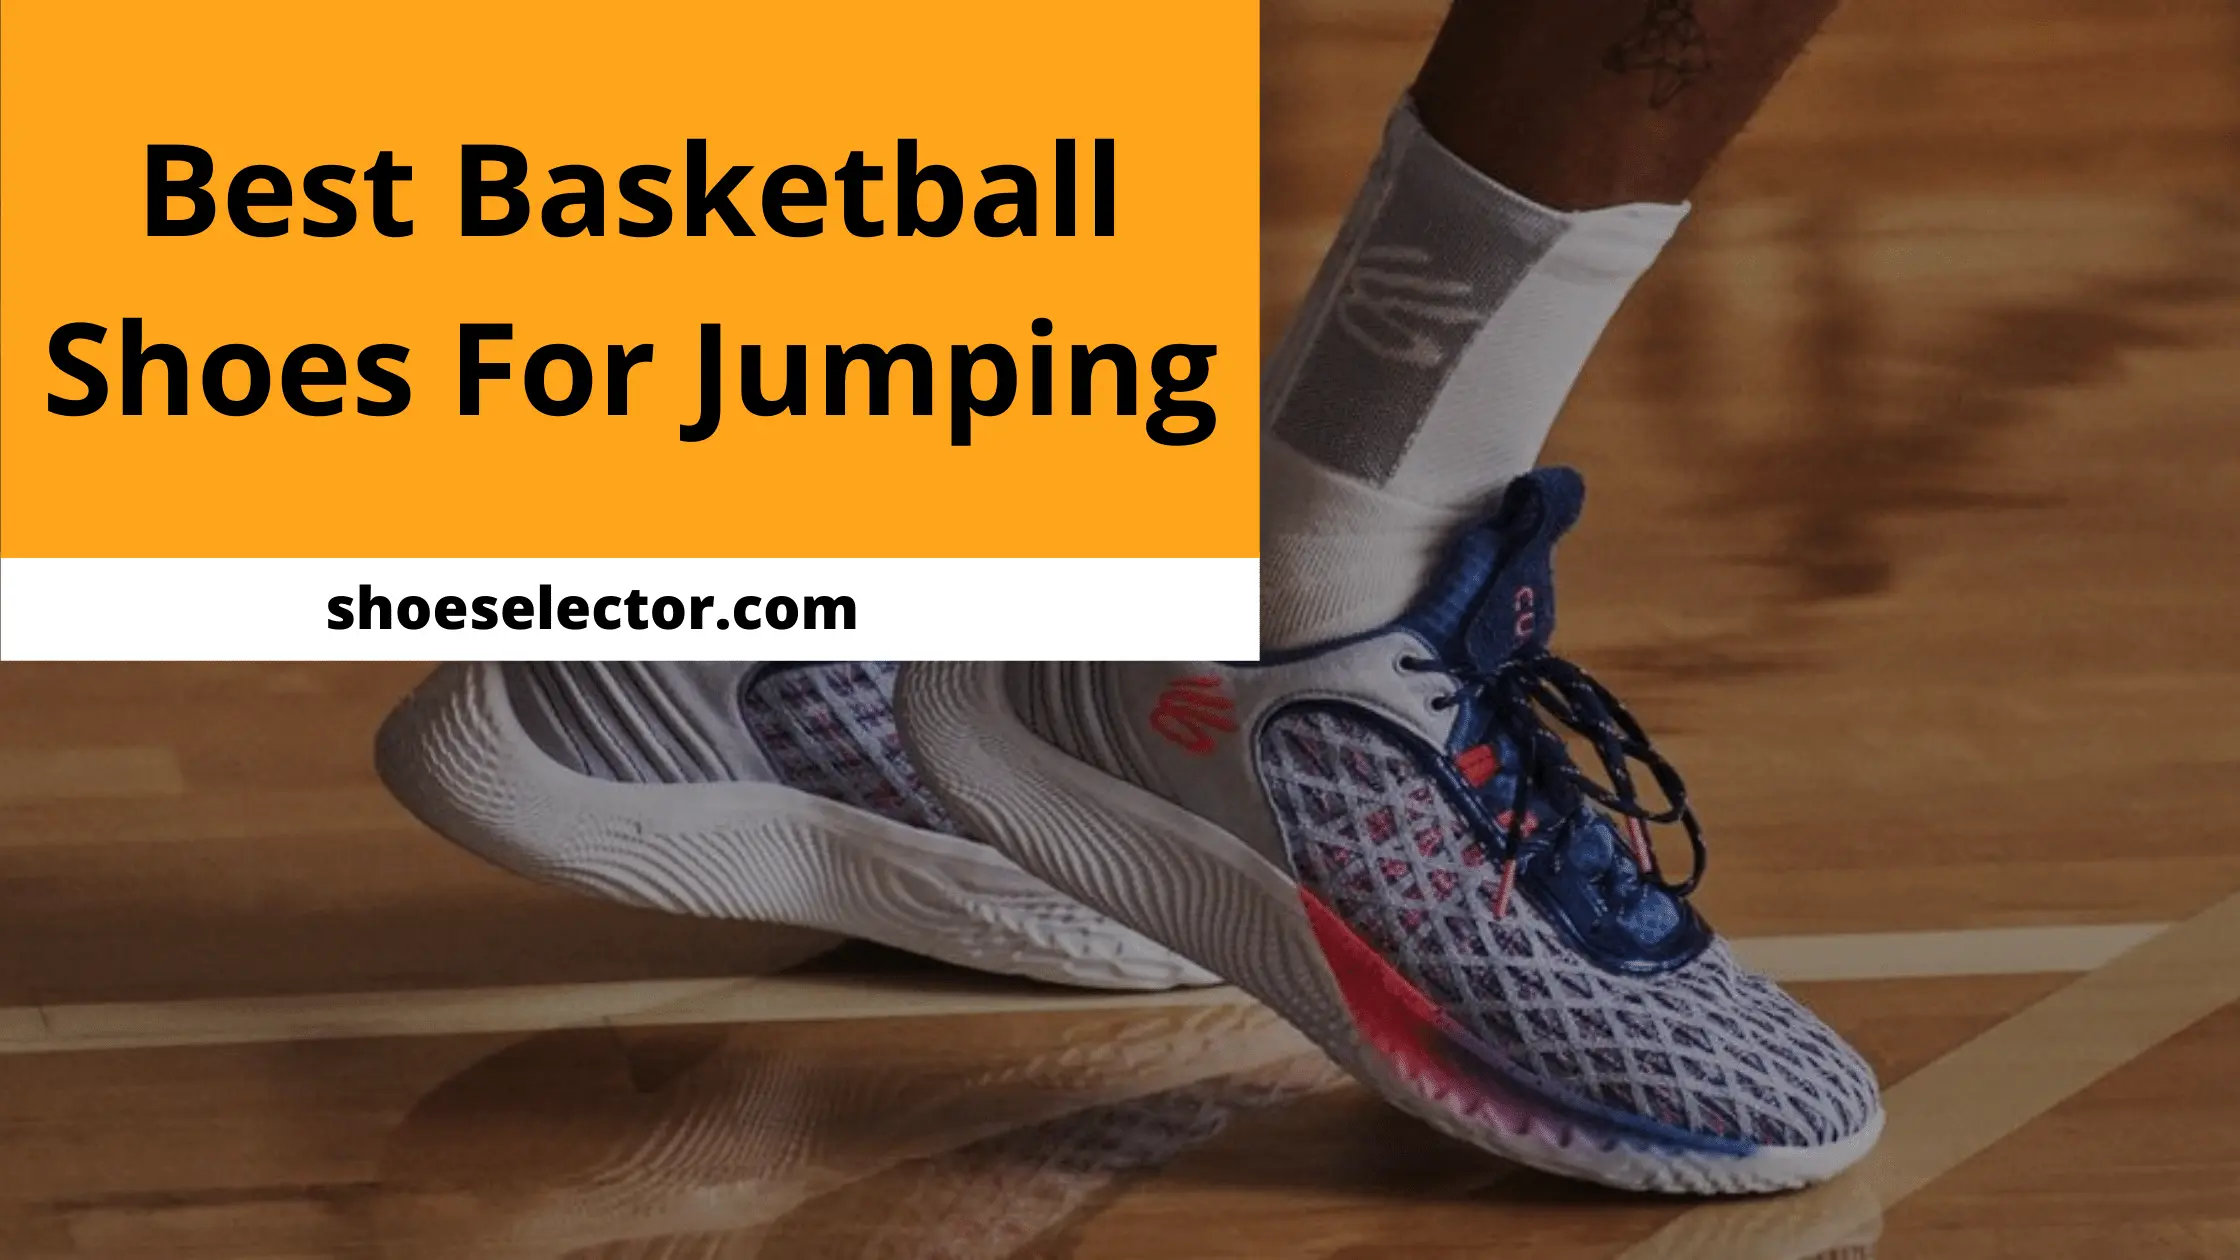 Best Basketball Shoes For Jumping | Supportive And Stylish